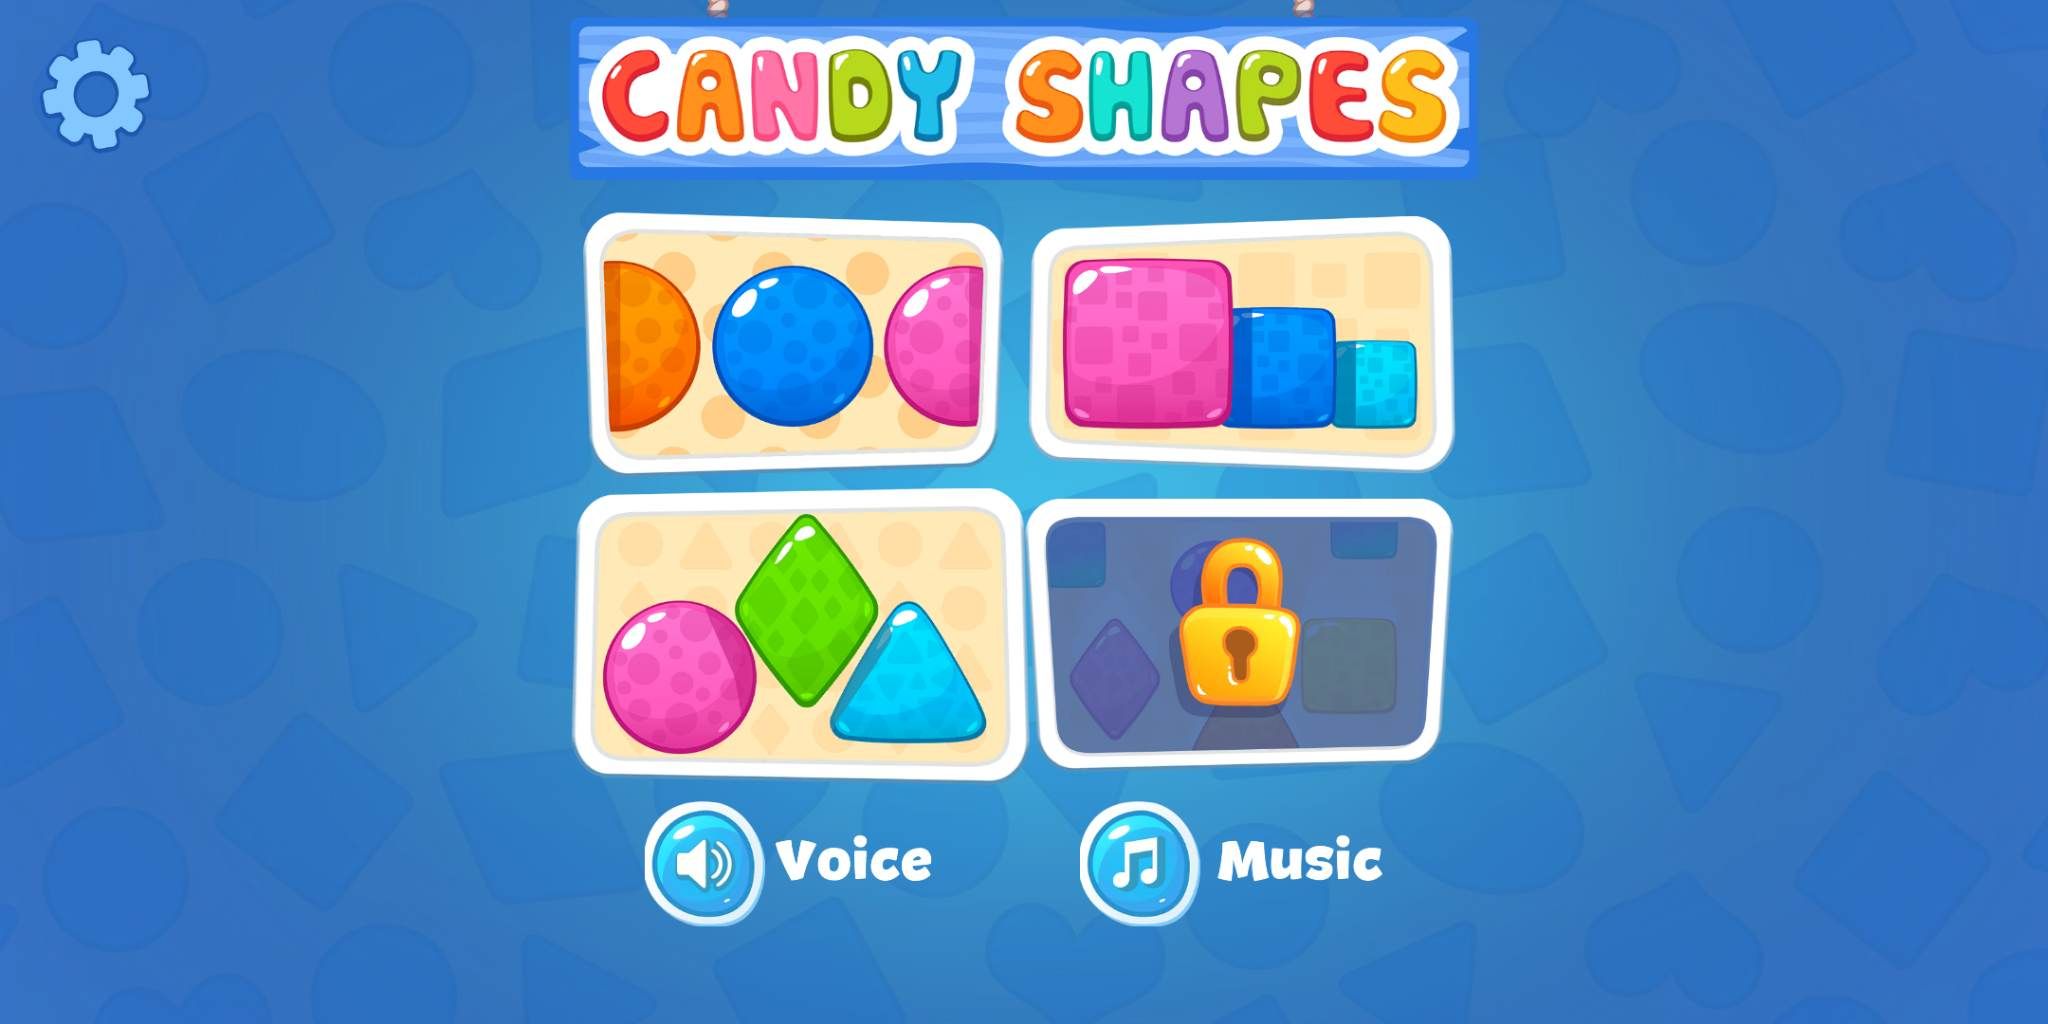 Screen for selecting applications for shapes and colors for children's games